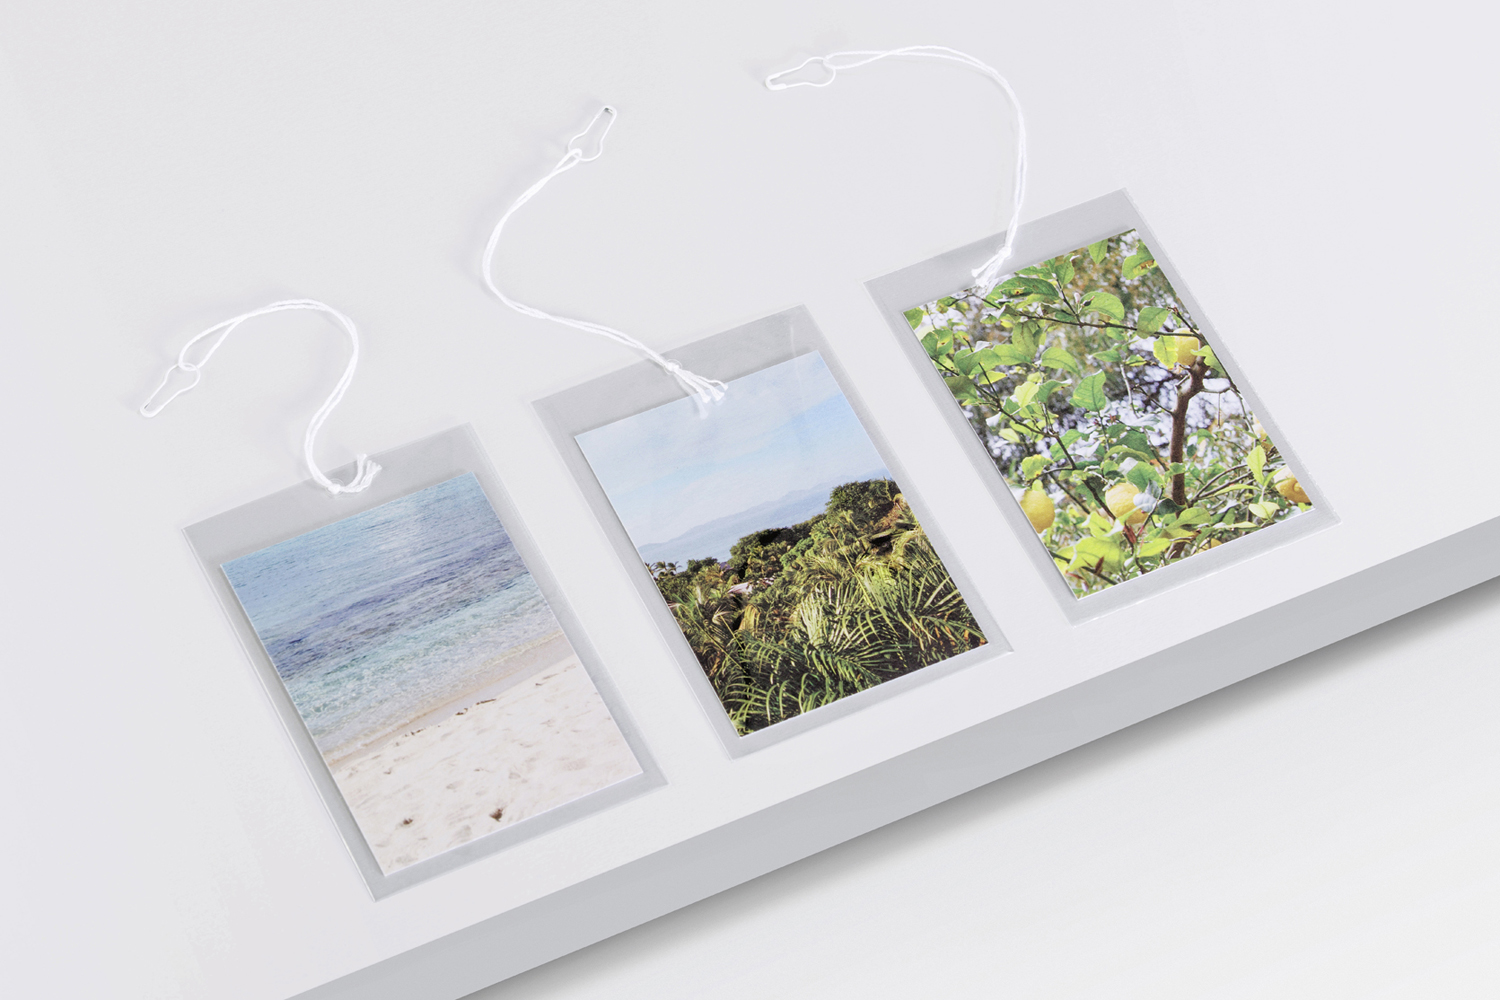 Swing Tag Design – The Dayrooms by Two Times Elliott, United Kingdom